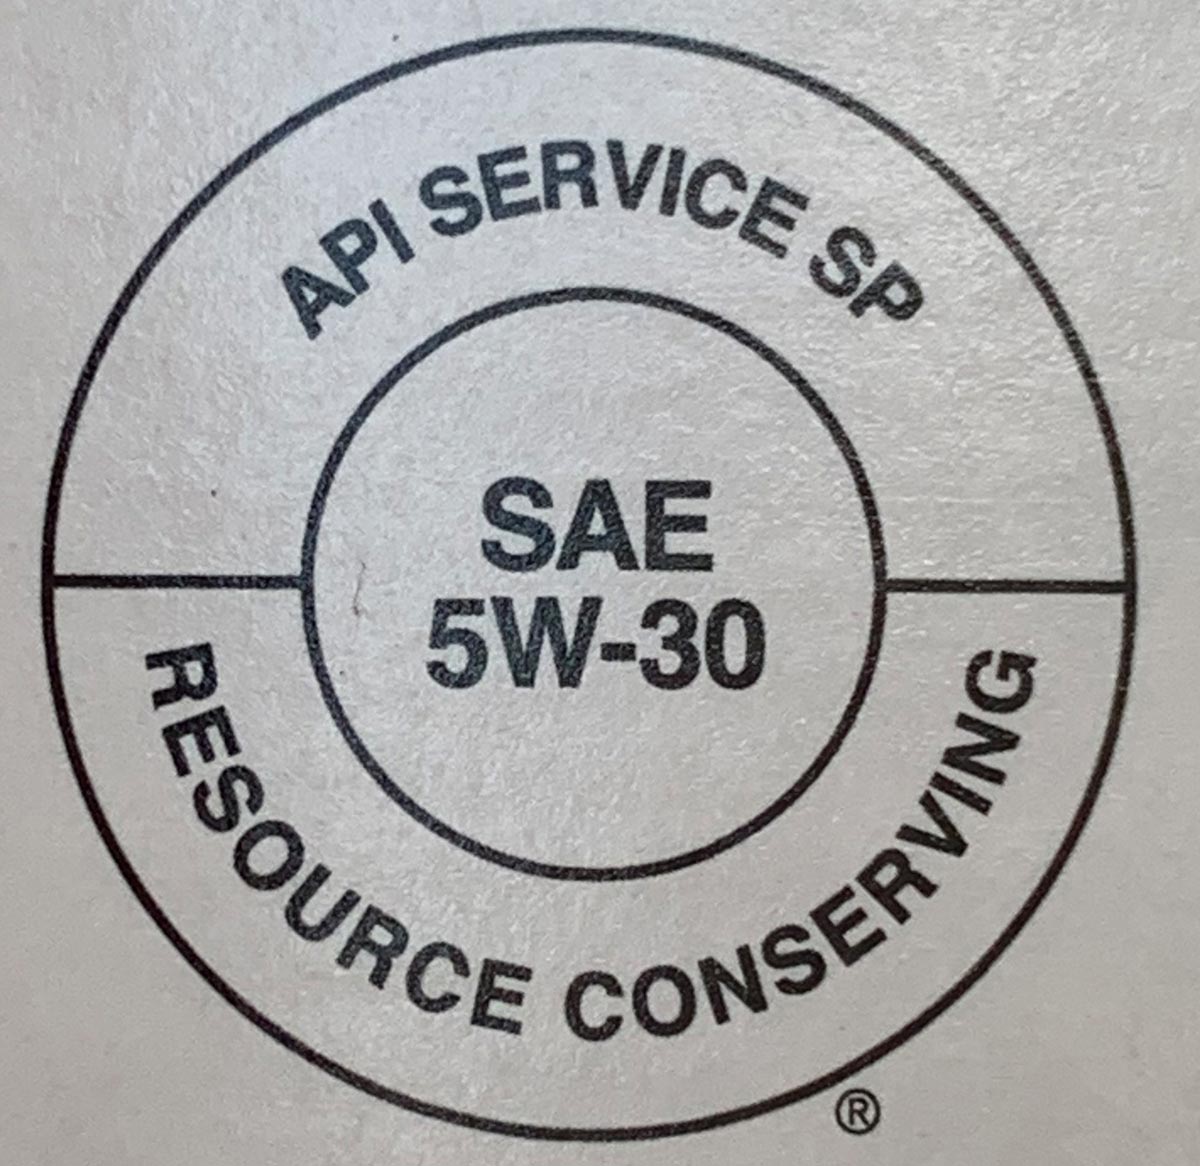 SAE 5W-30 graphic seal